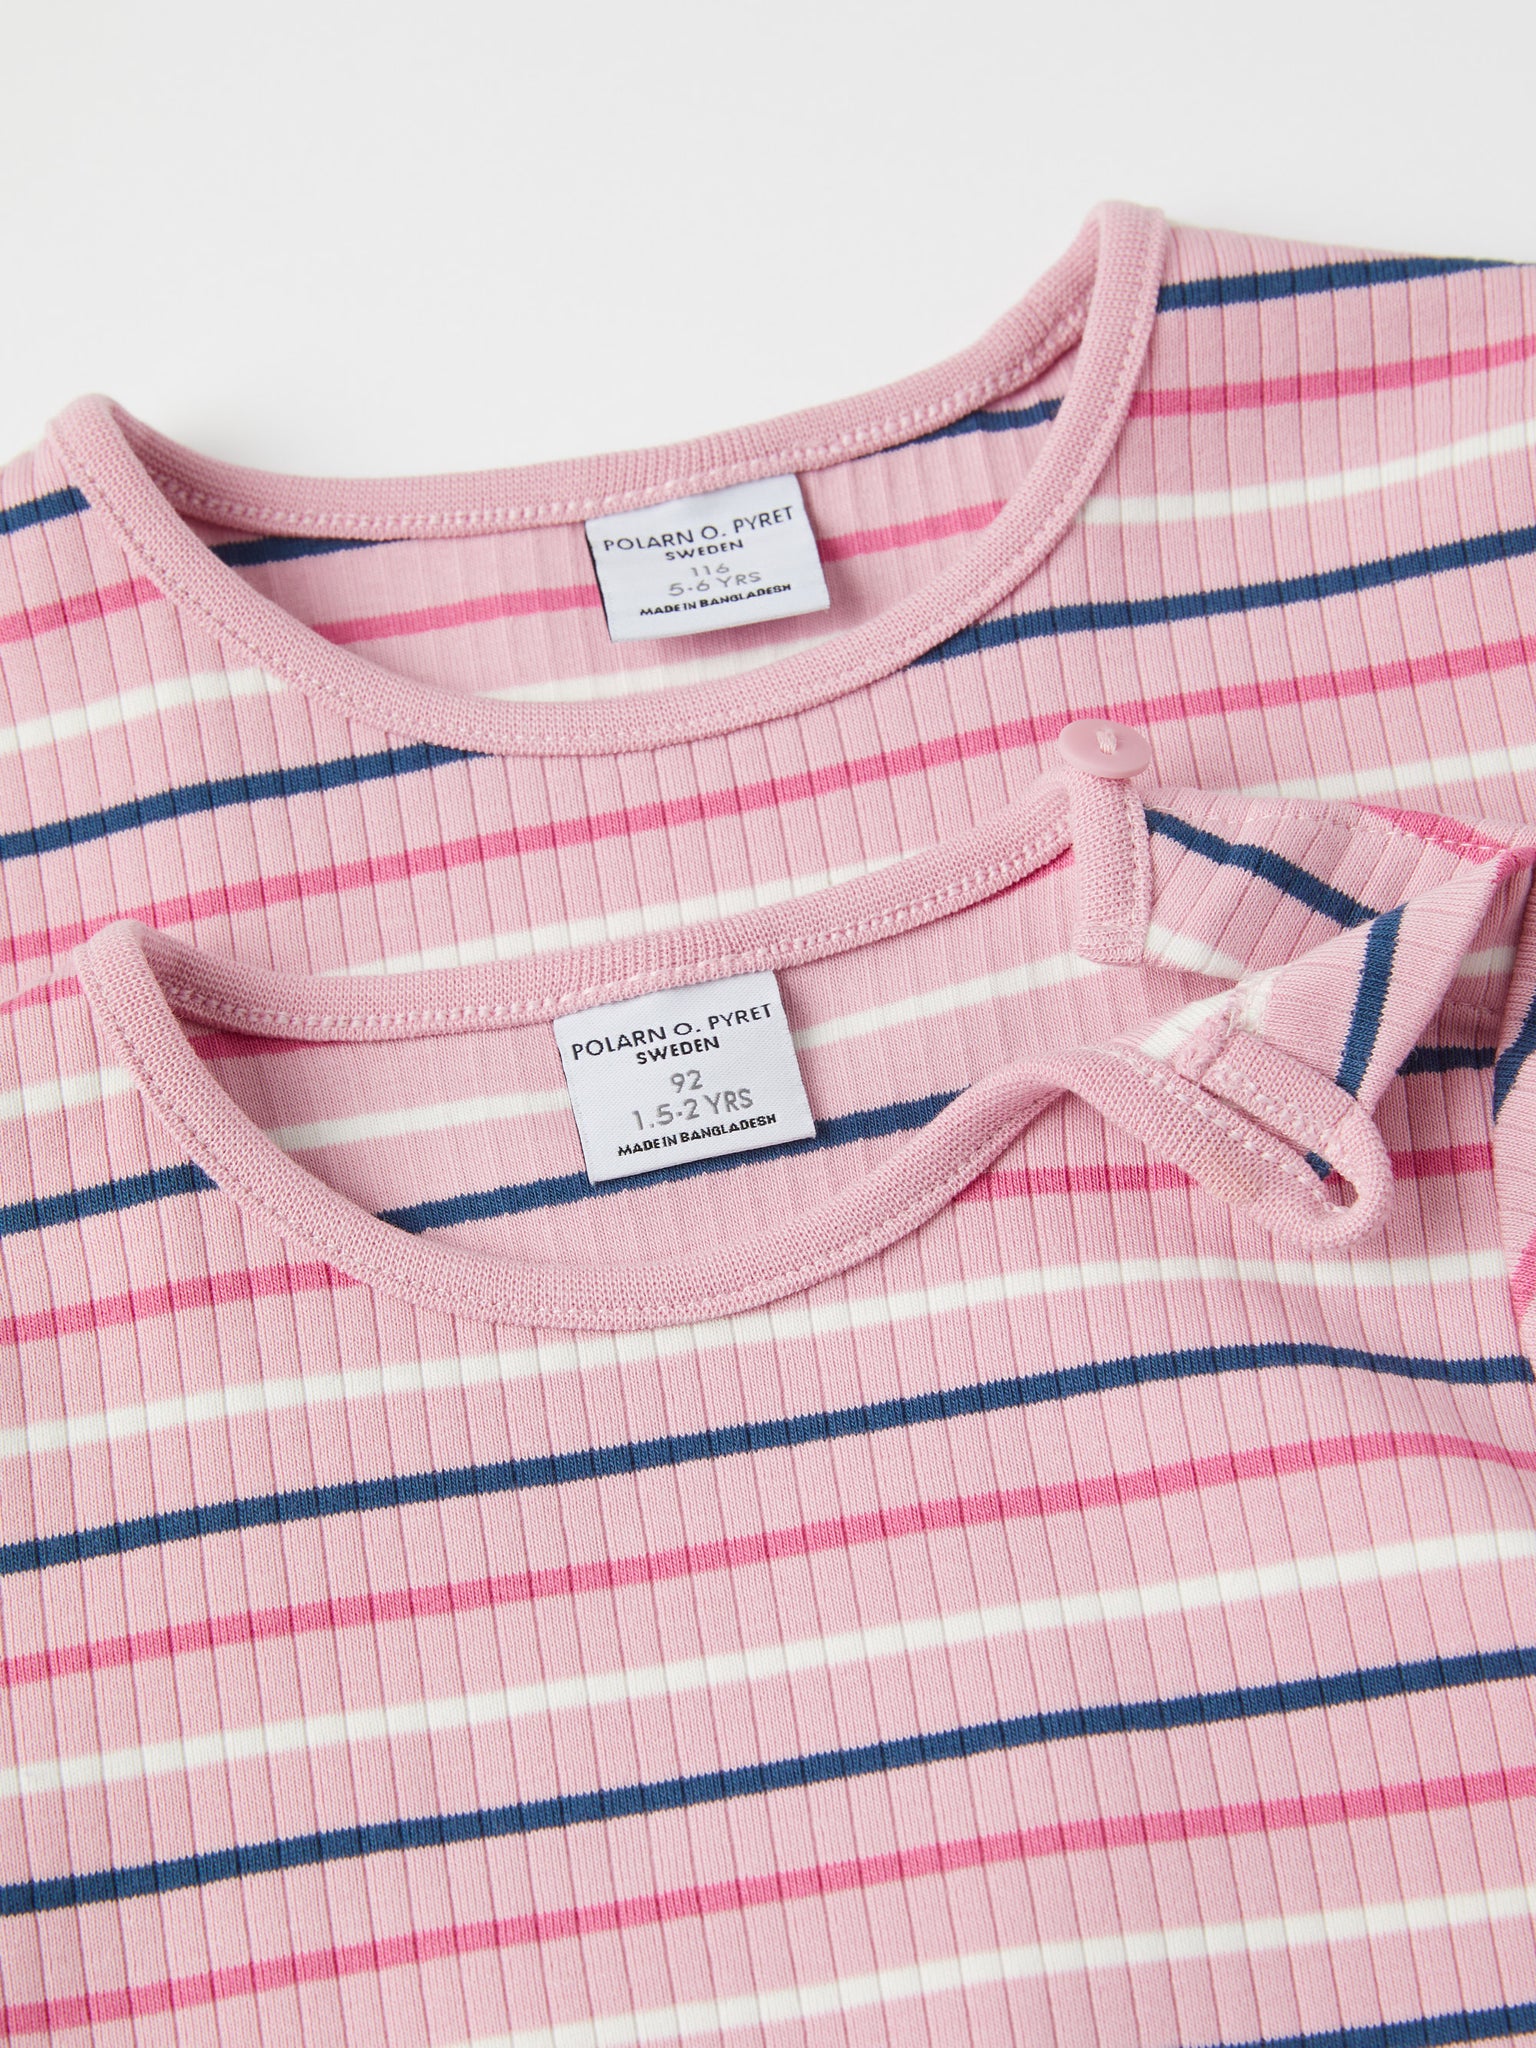 Striped Cotton Kids T-Shirt from the Polarn O. Pyret kidswear collection. The best ethical kids clothes